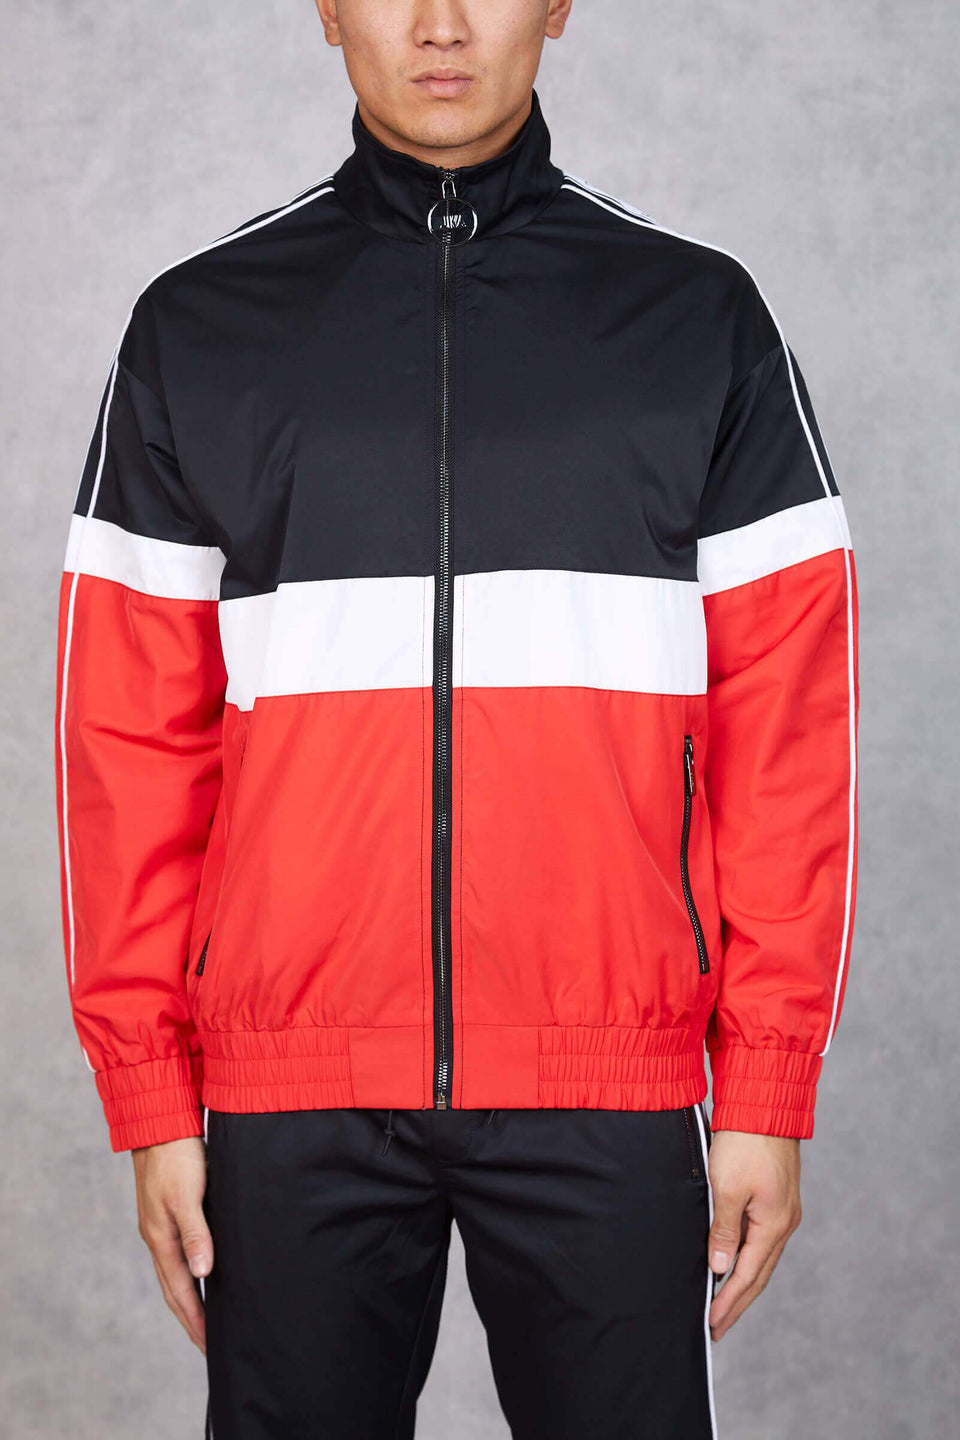 Section Retro Taped Tracksuit Jacket - Red/Black